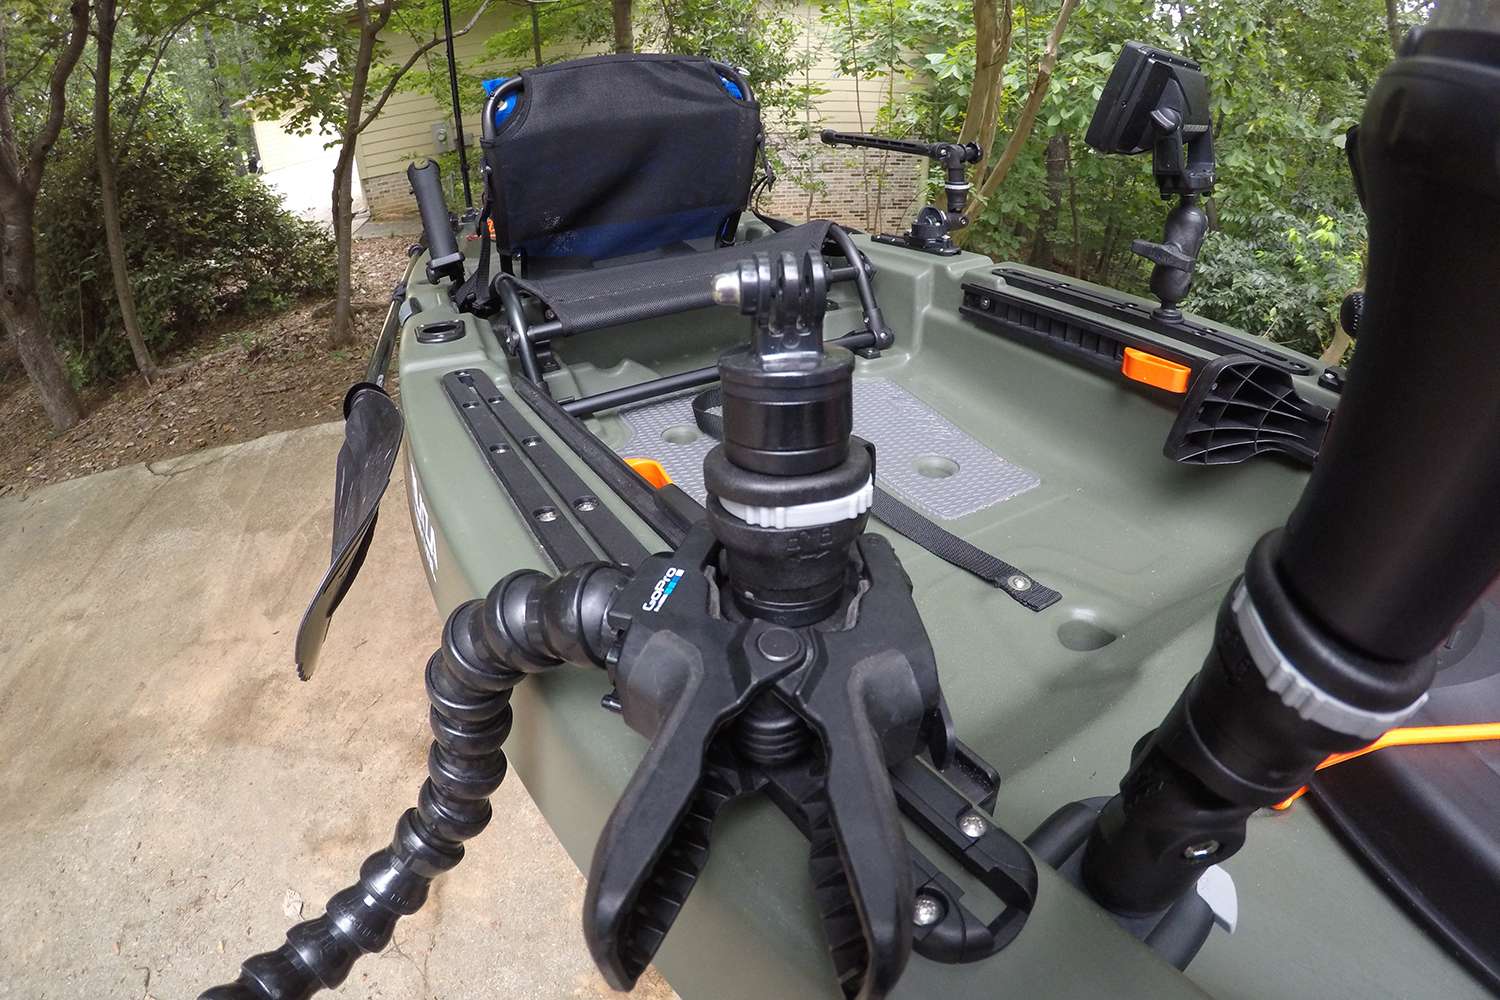 Here's a close look at the action camera mount.